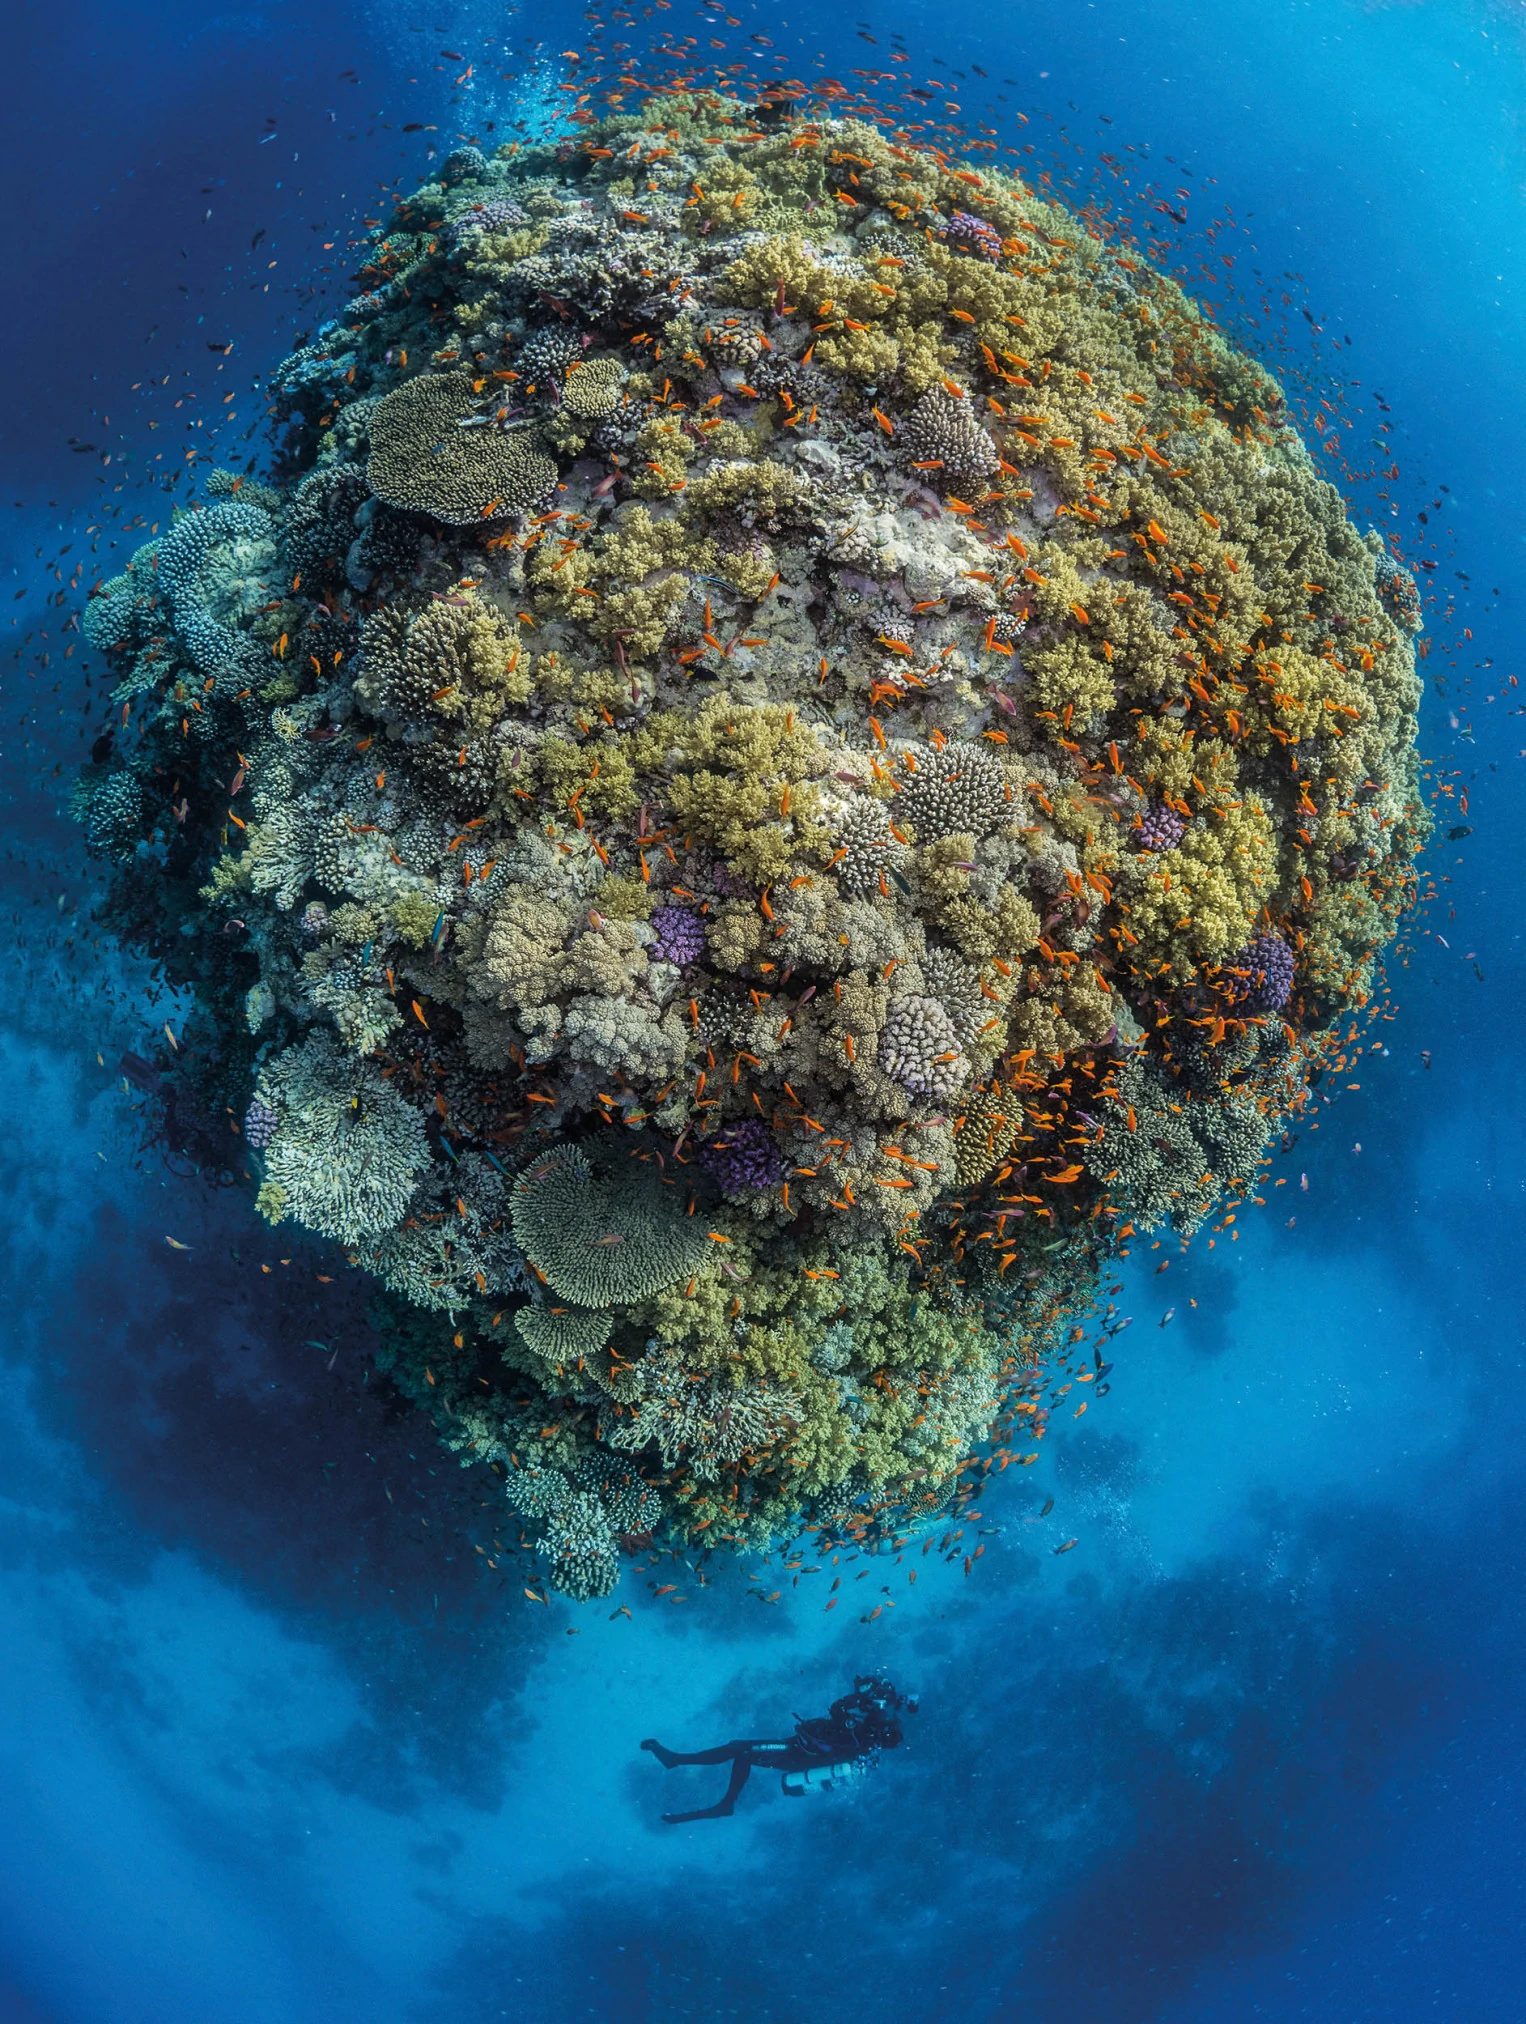 Top Down Pinnacle with Diver - Photographs by Paul Duxfield